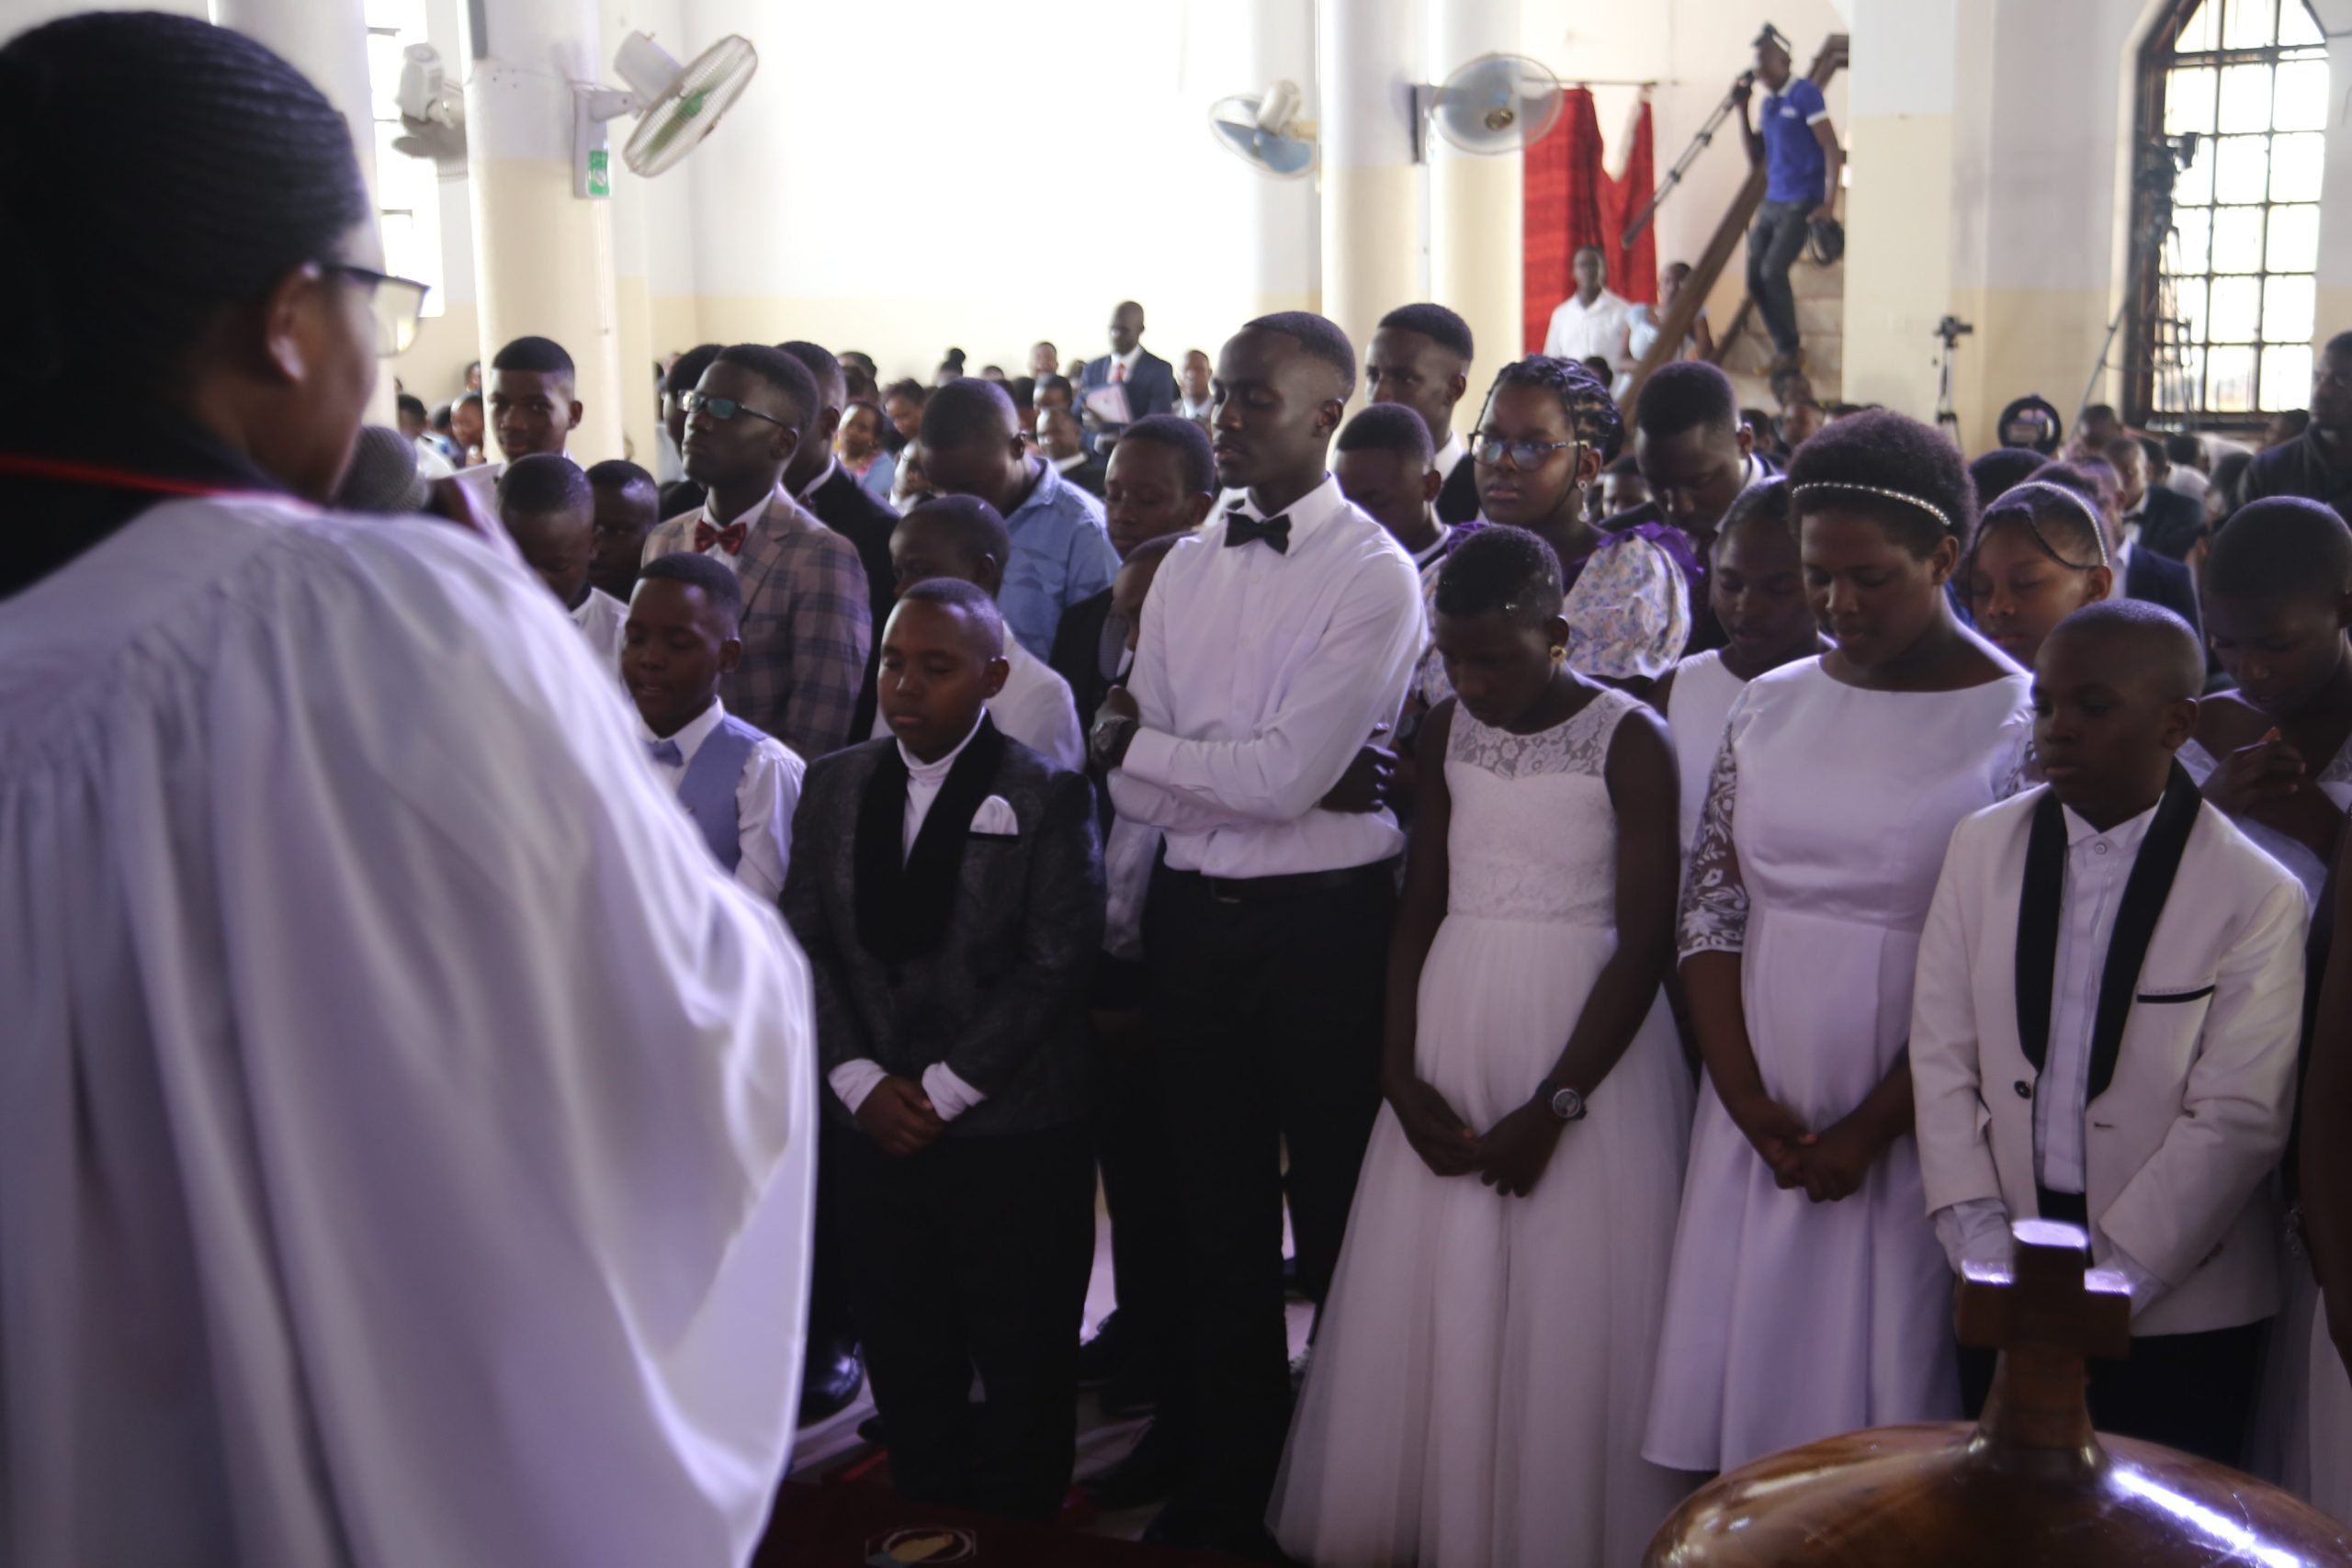 Some of the confirmants during the service